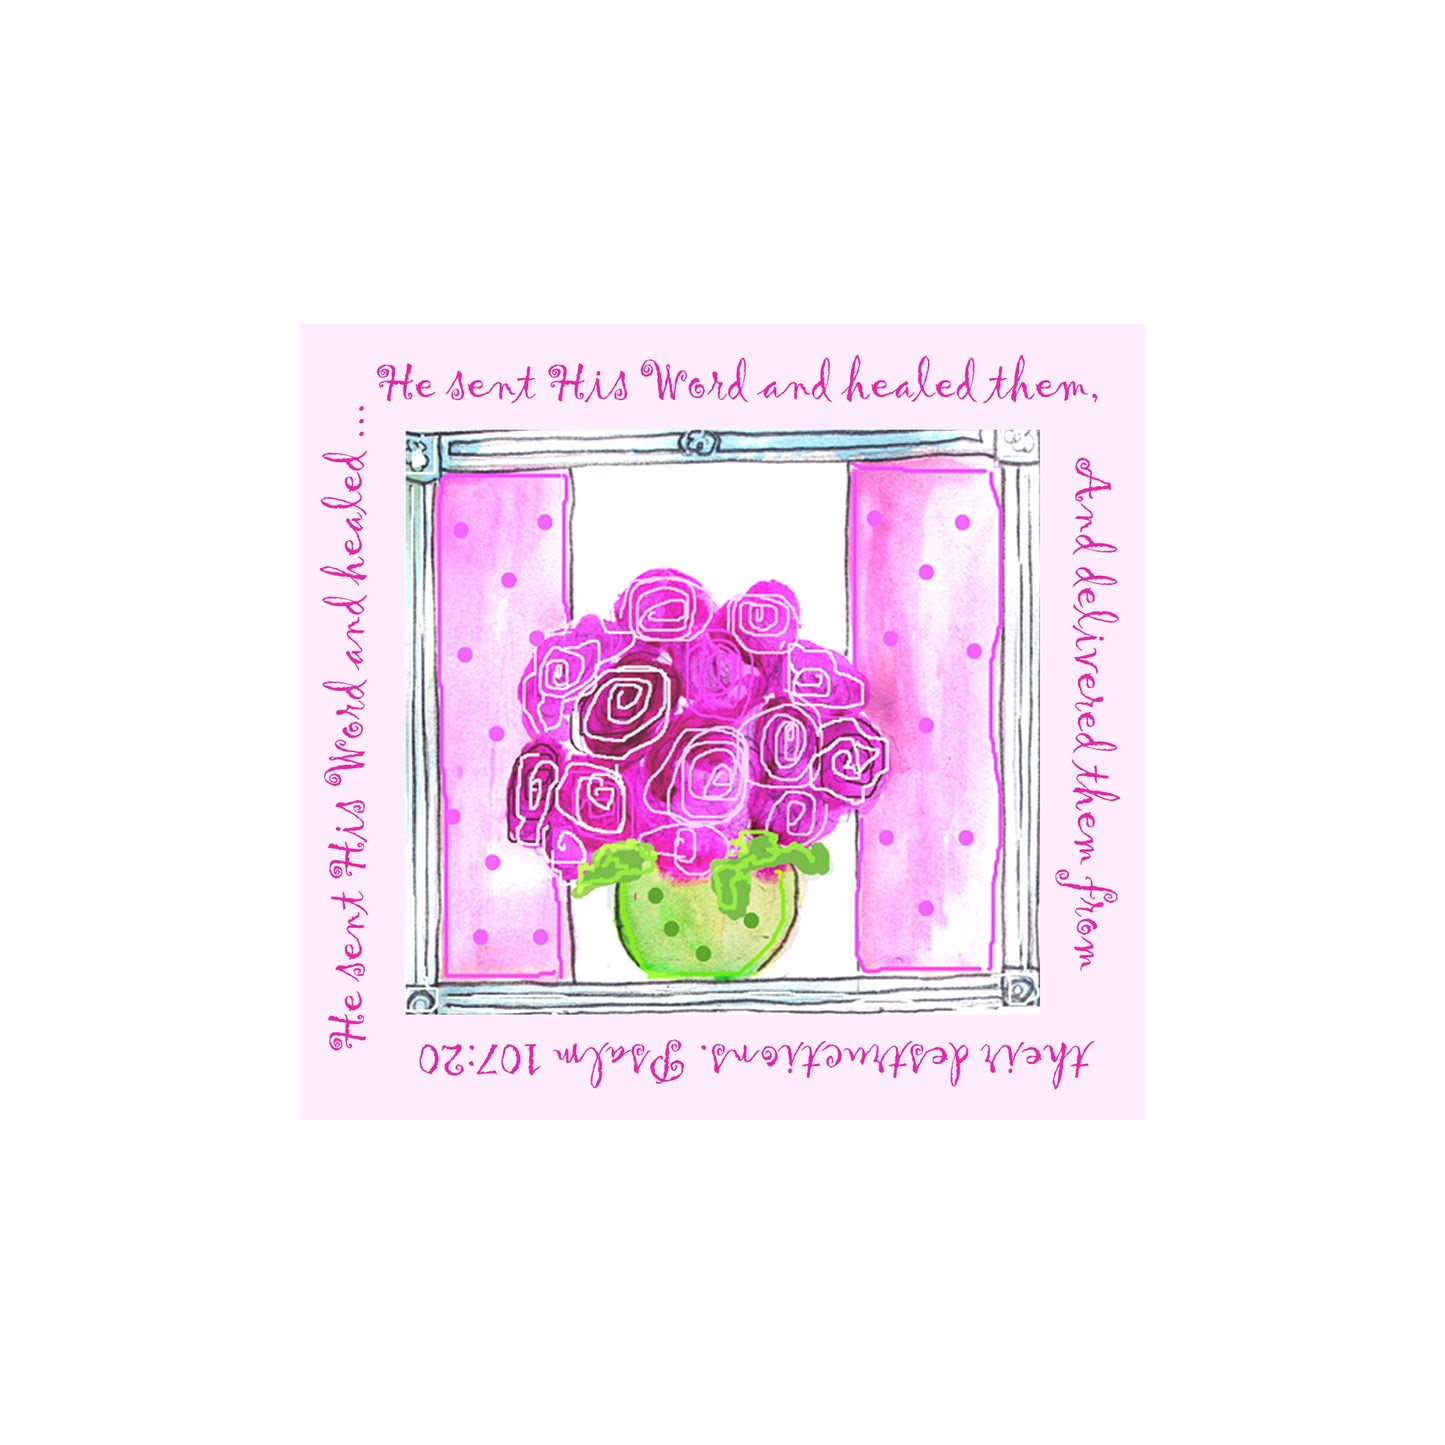 Bright Pink - Roses in a Bowl Magnet